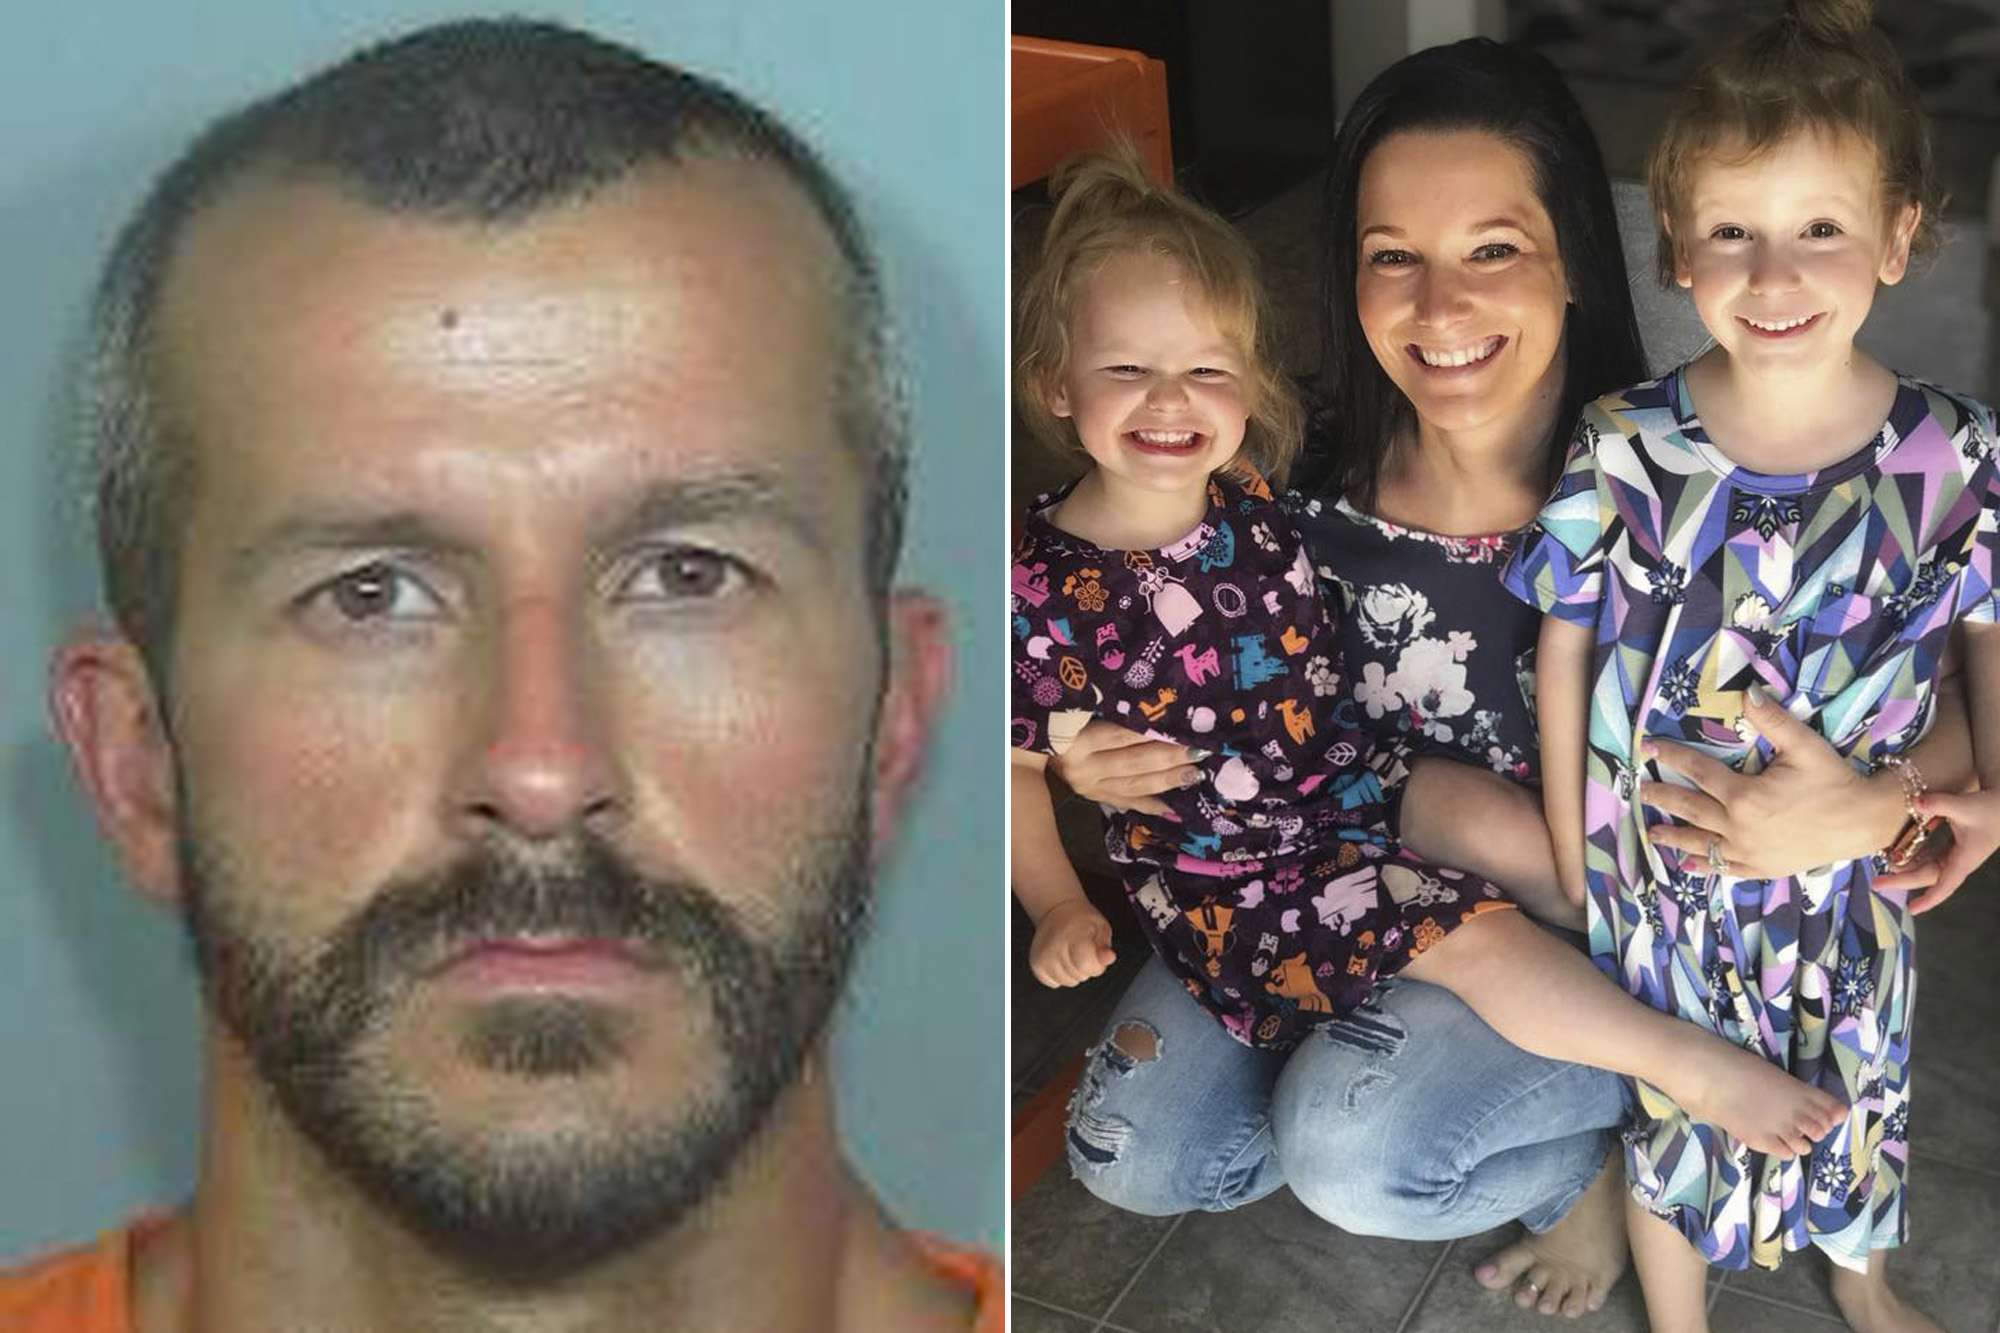 'American Murder' digs into why Chris Watts killed his family